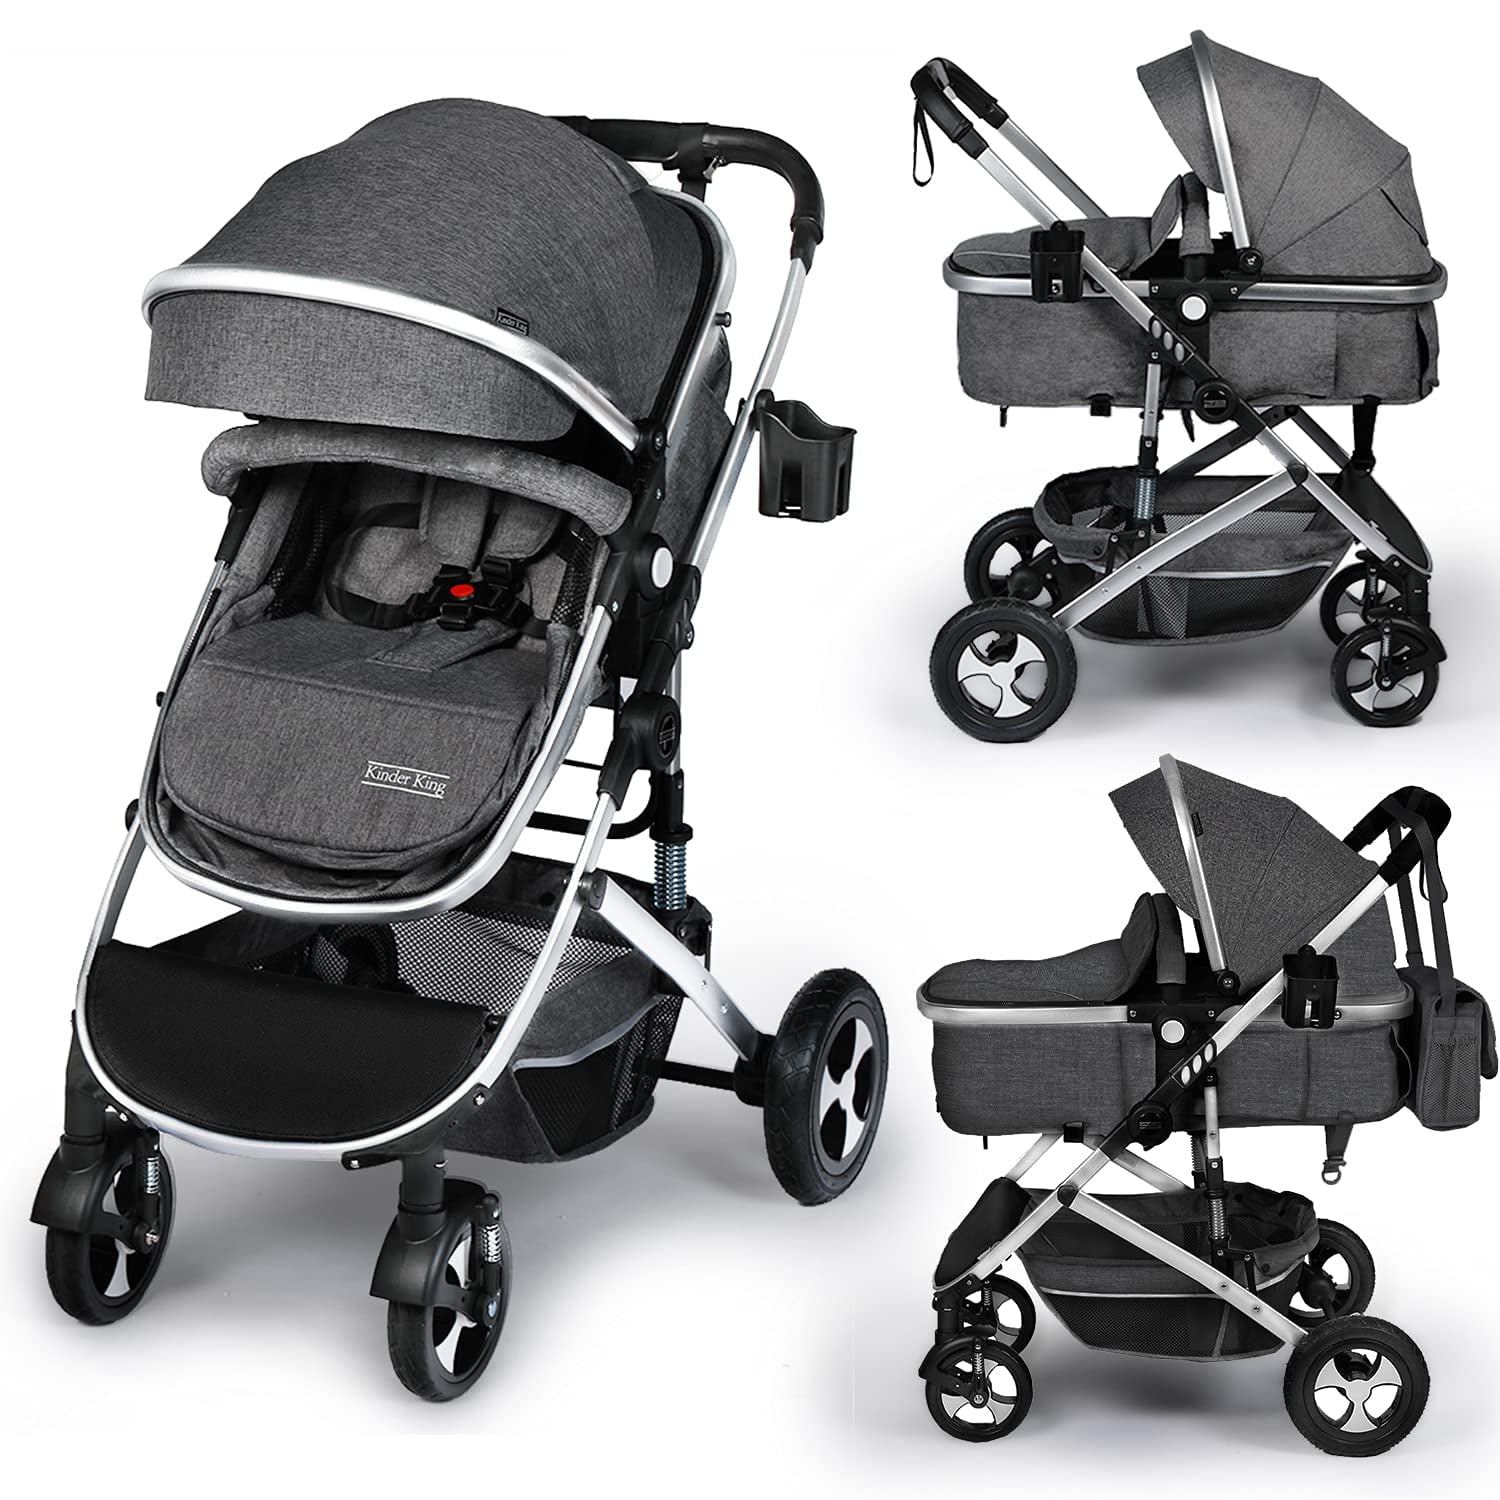 Black Convertible Baby Strollers for Newborn and Infant Reversible 2-in-1 High Landscape Bassinet Pushchair 